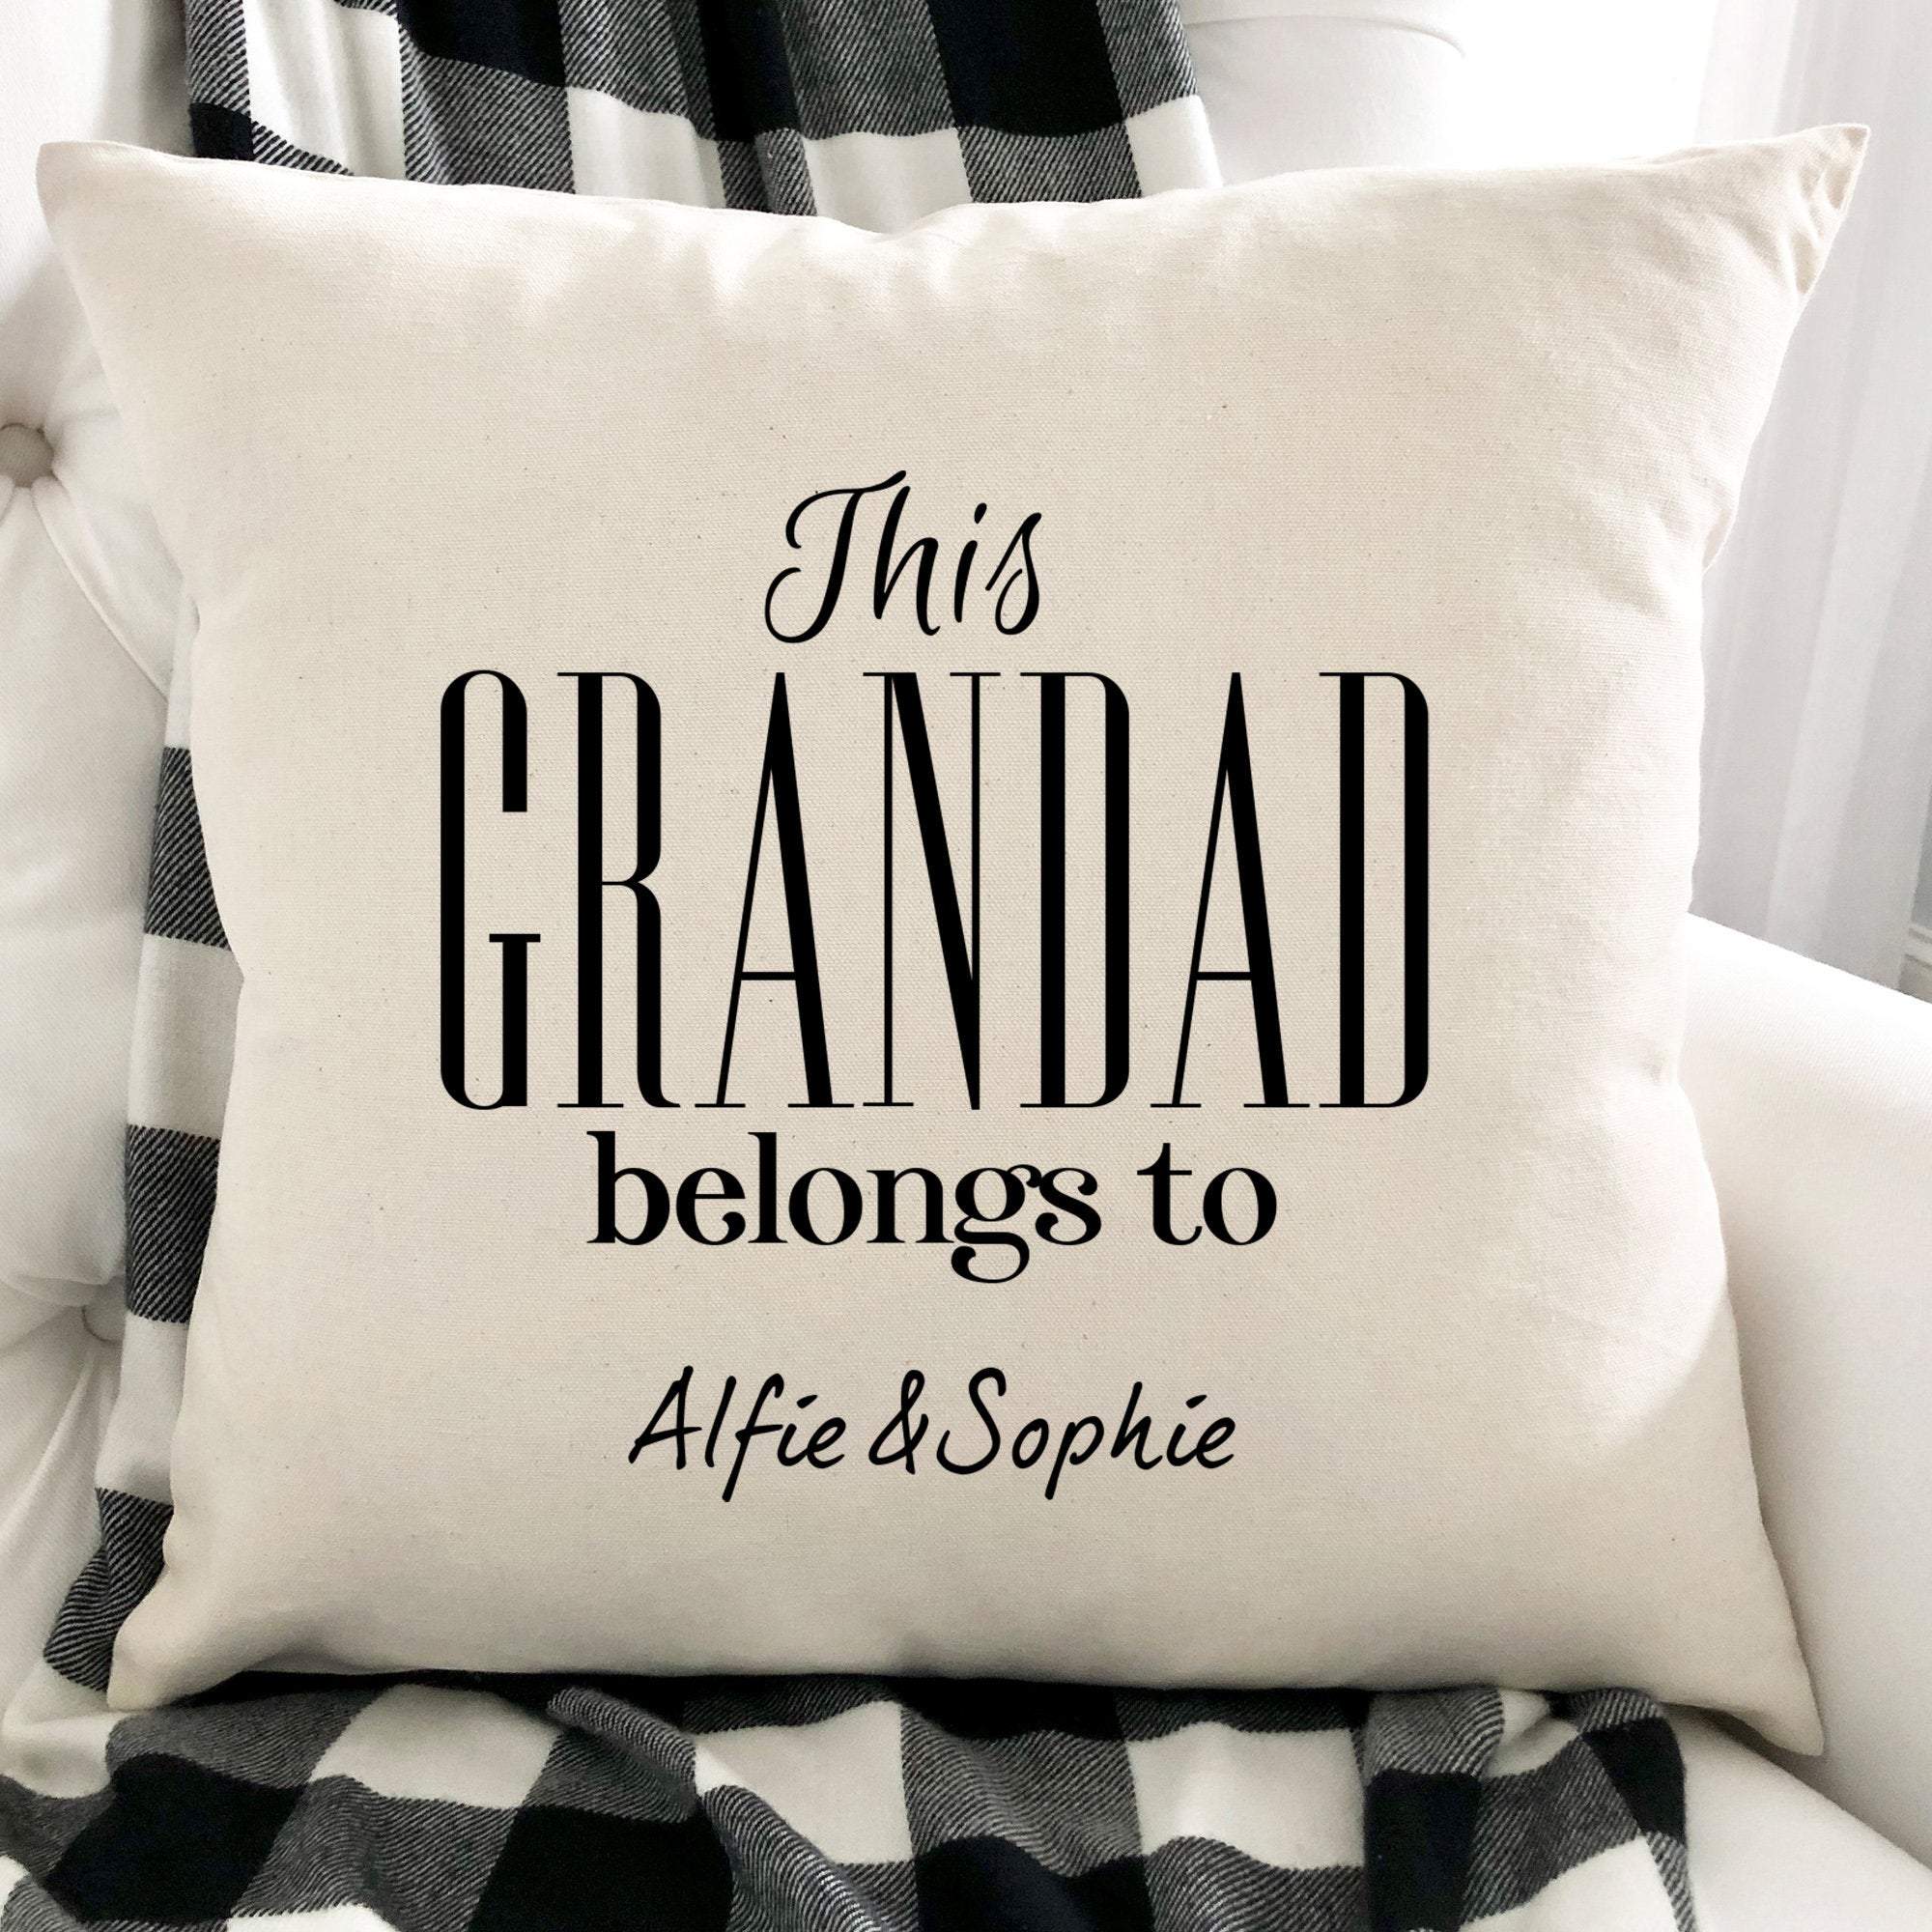 Personalised this grandad belongs to cushion with grandchildren names, Father's Day Gift for grandpa